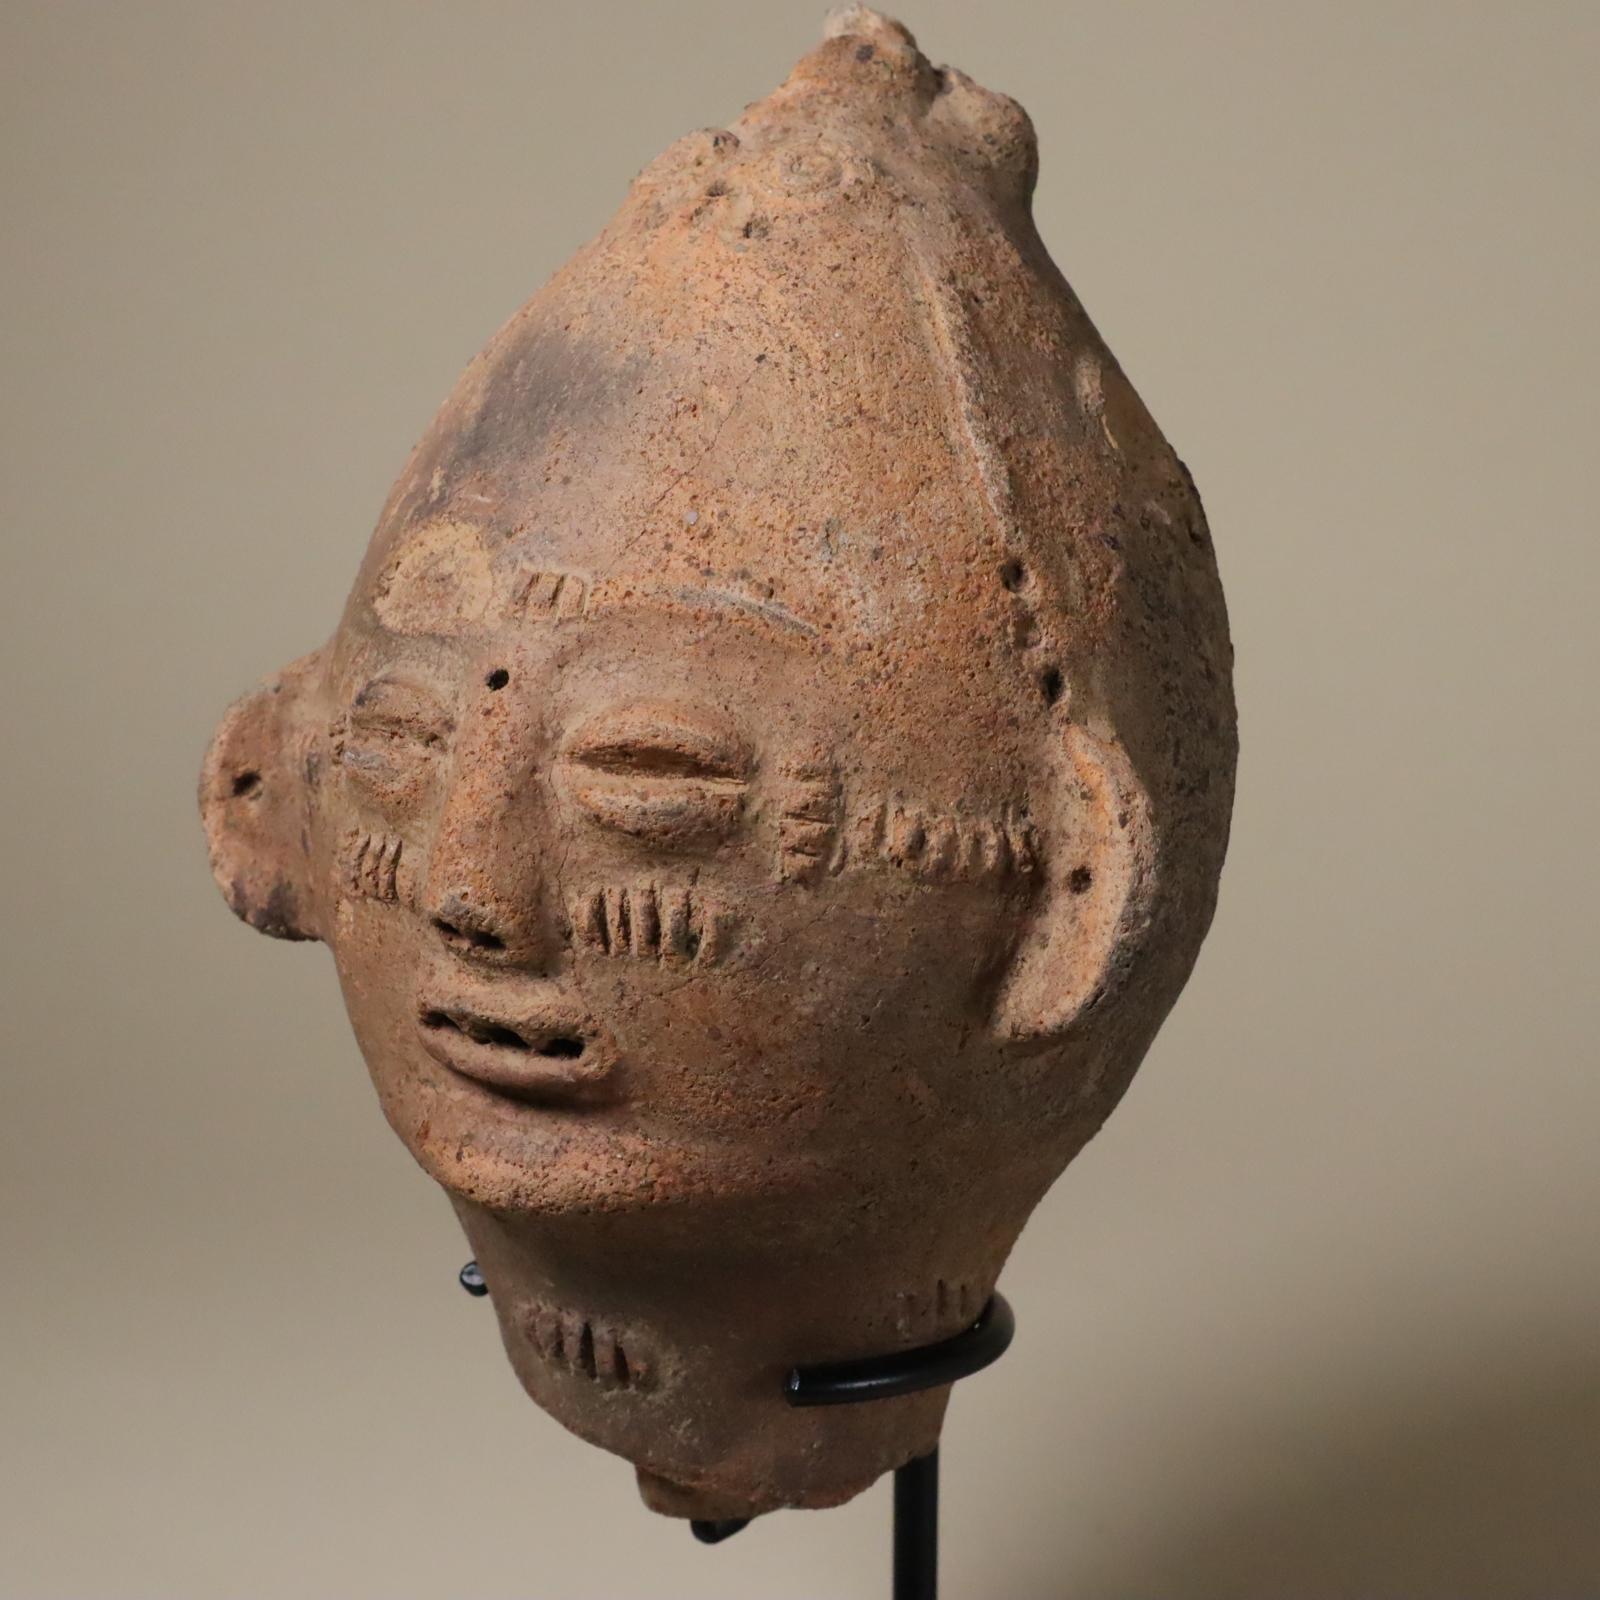 Store closing March 31. This is an earthenware or terracotta portrait from the Akan people of Ghana. 19th century or earlier. 
This one has a lively, animated expression. There are raised scarification marks on the cheeks, temples, and on the brow.